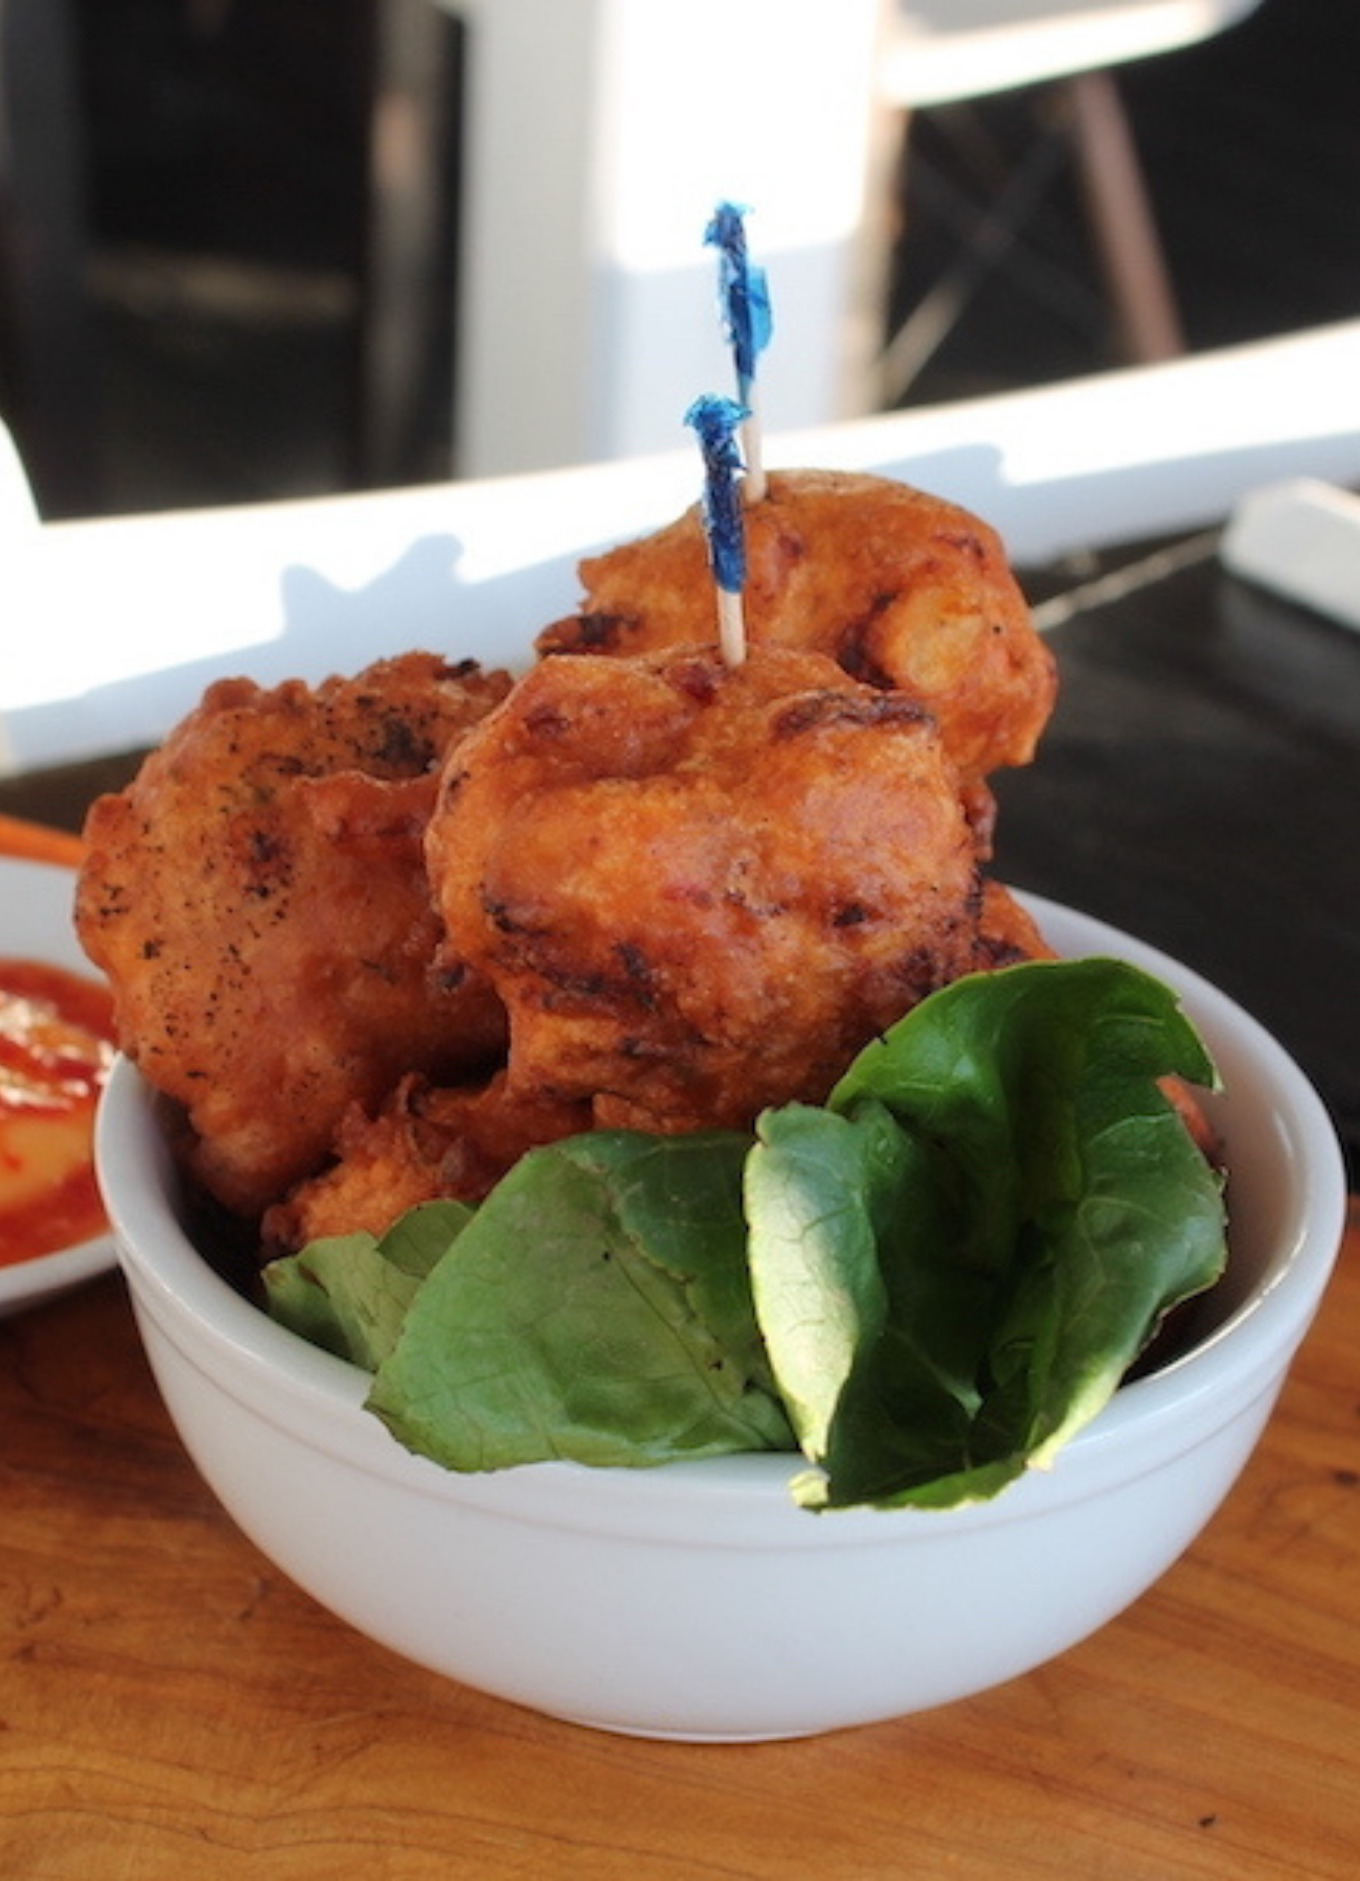 Bahamian conch fritters on display at a restaurant in Nassau, Bahamas.